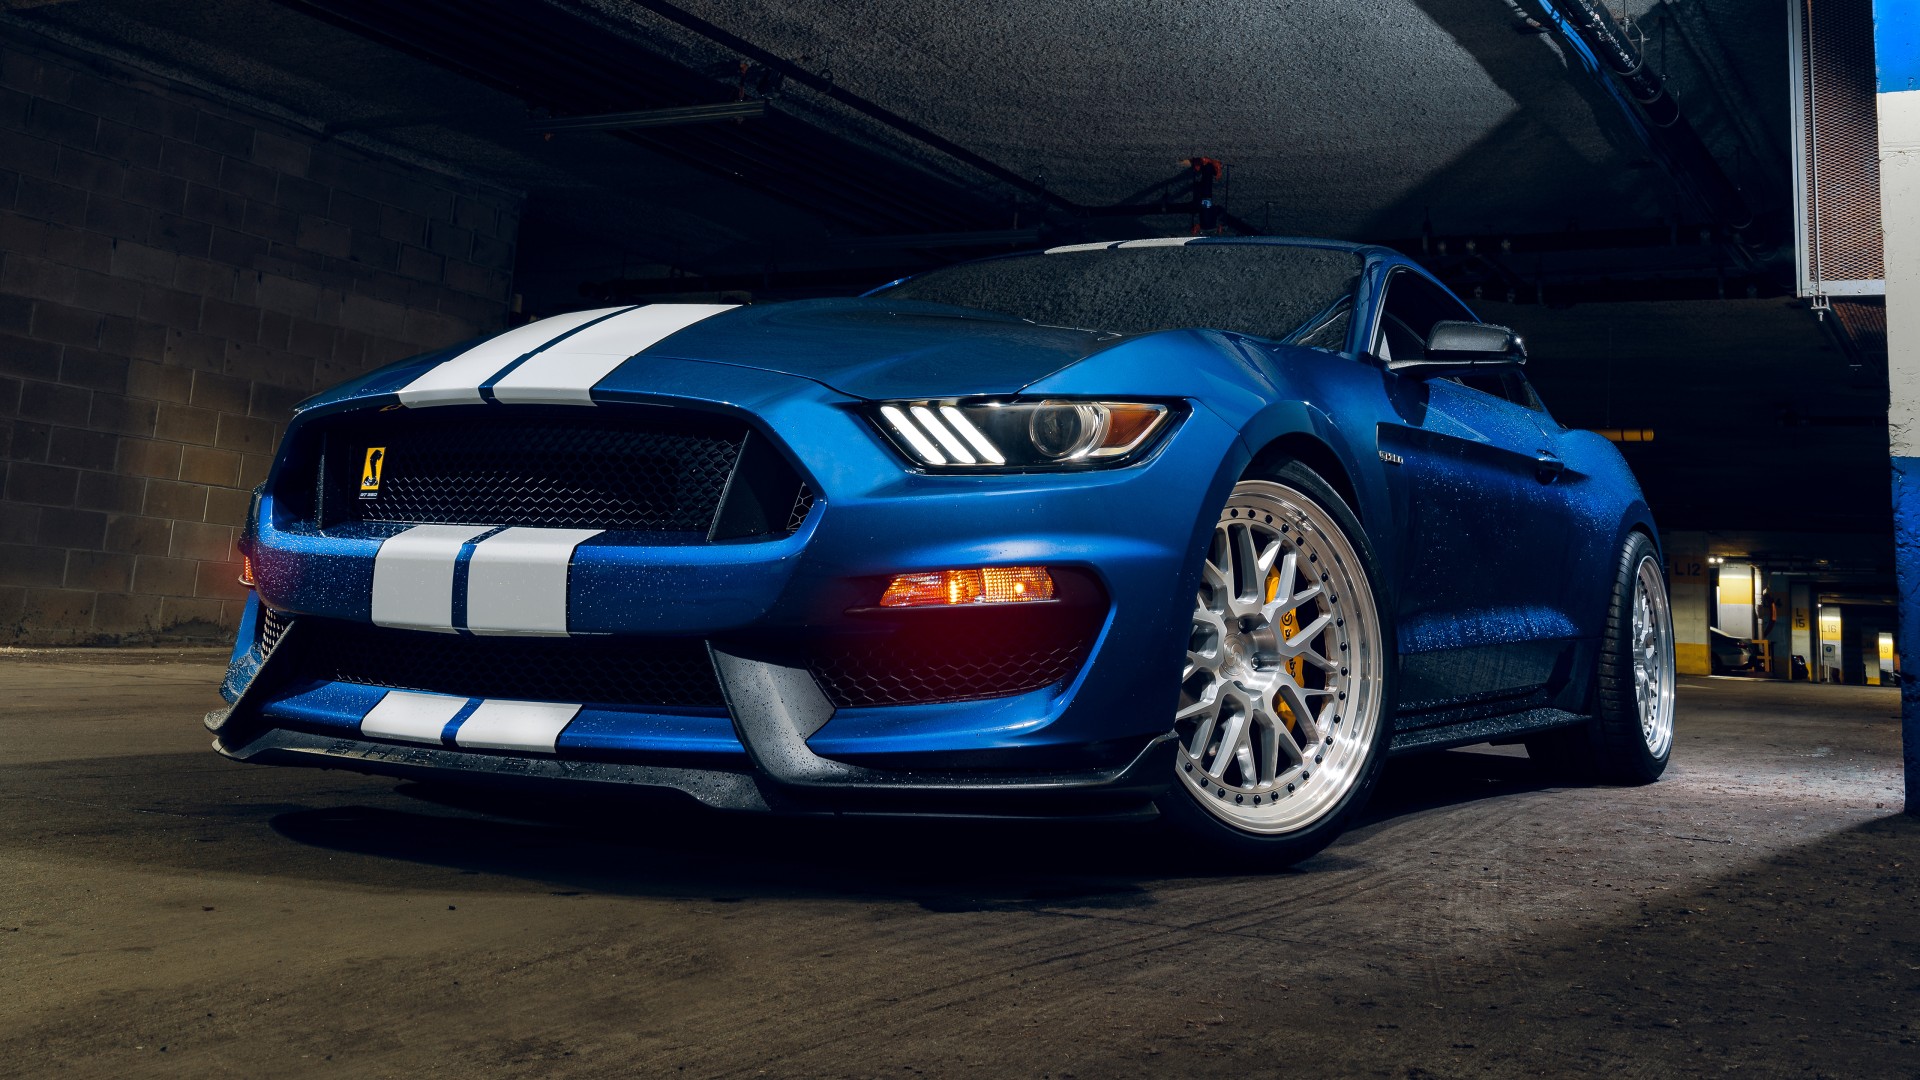 Ford Shelby GT350 8K Wallpaper - HD Car Wallpapers #23467